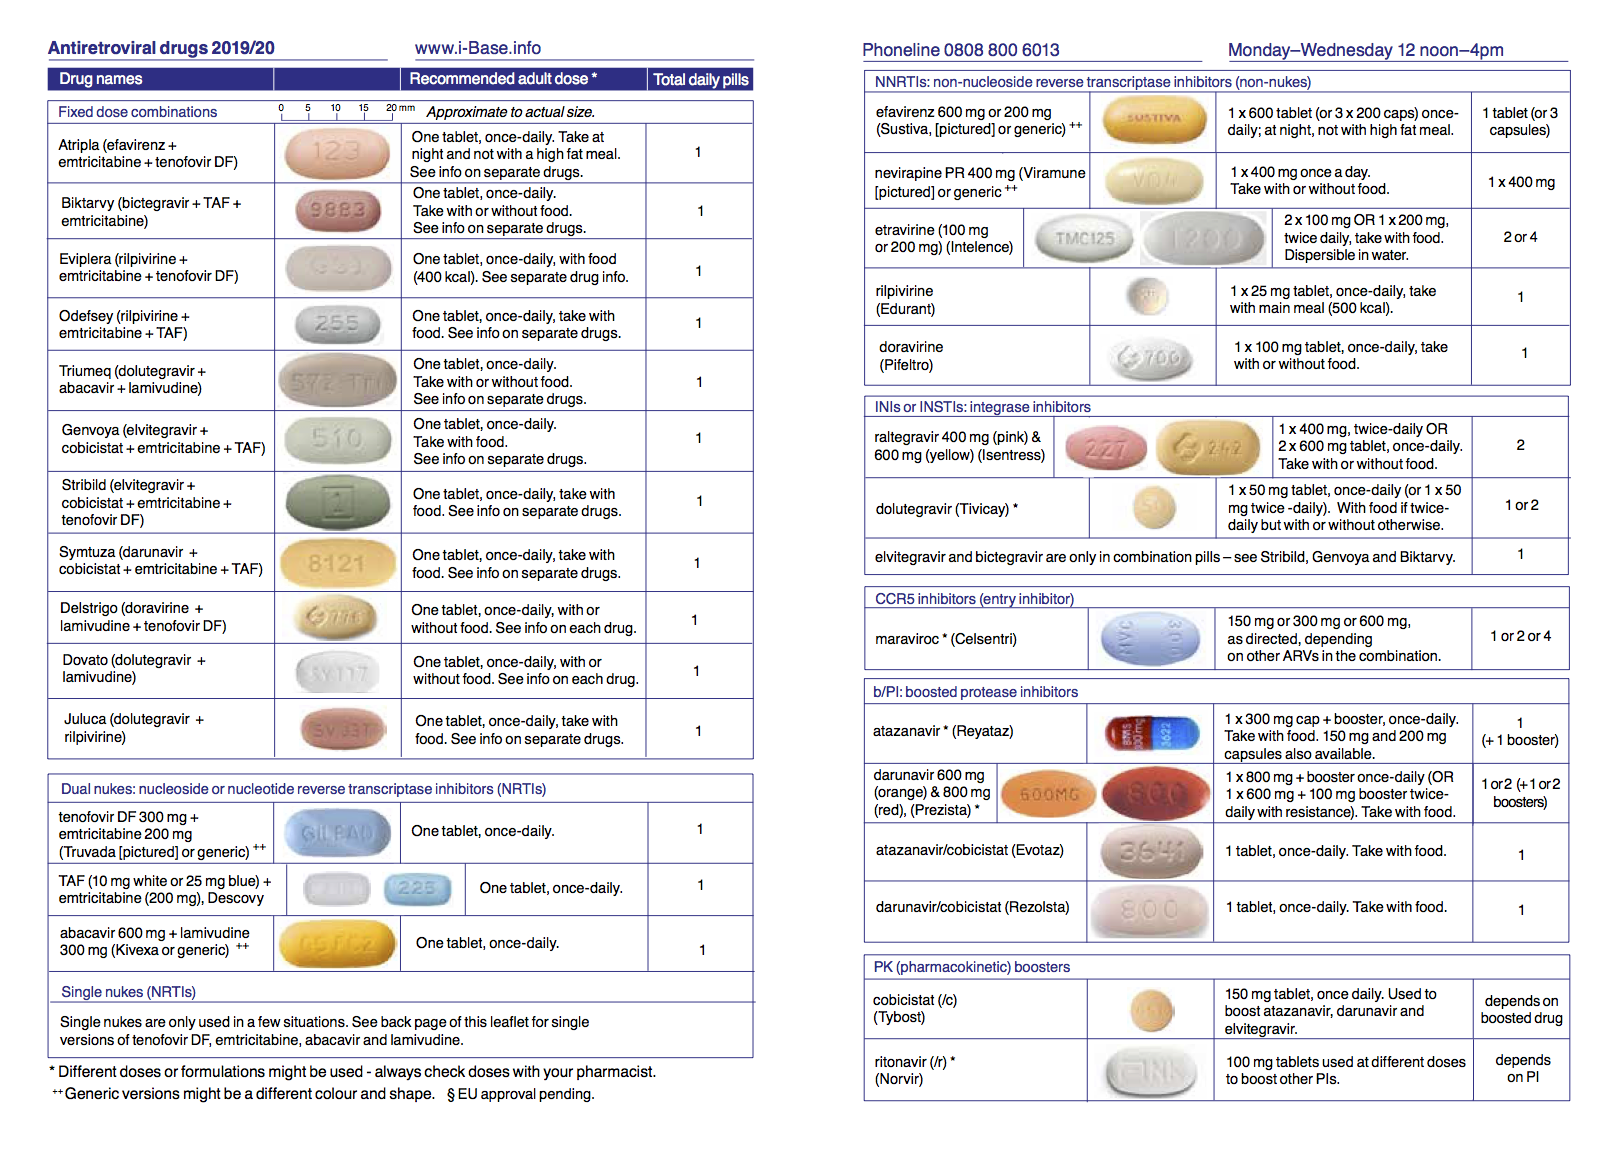 Antiretroviral drugs illustrated pill chart Guides HIV iBase